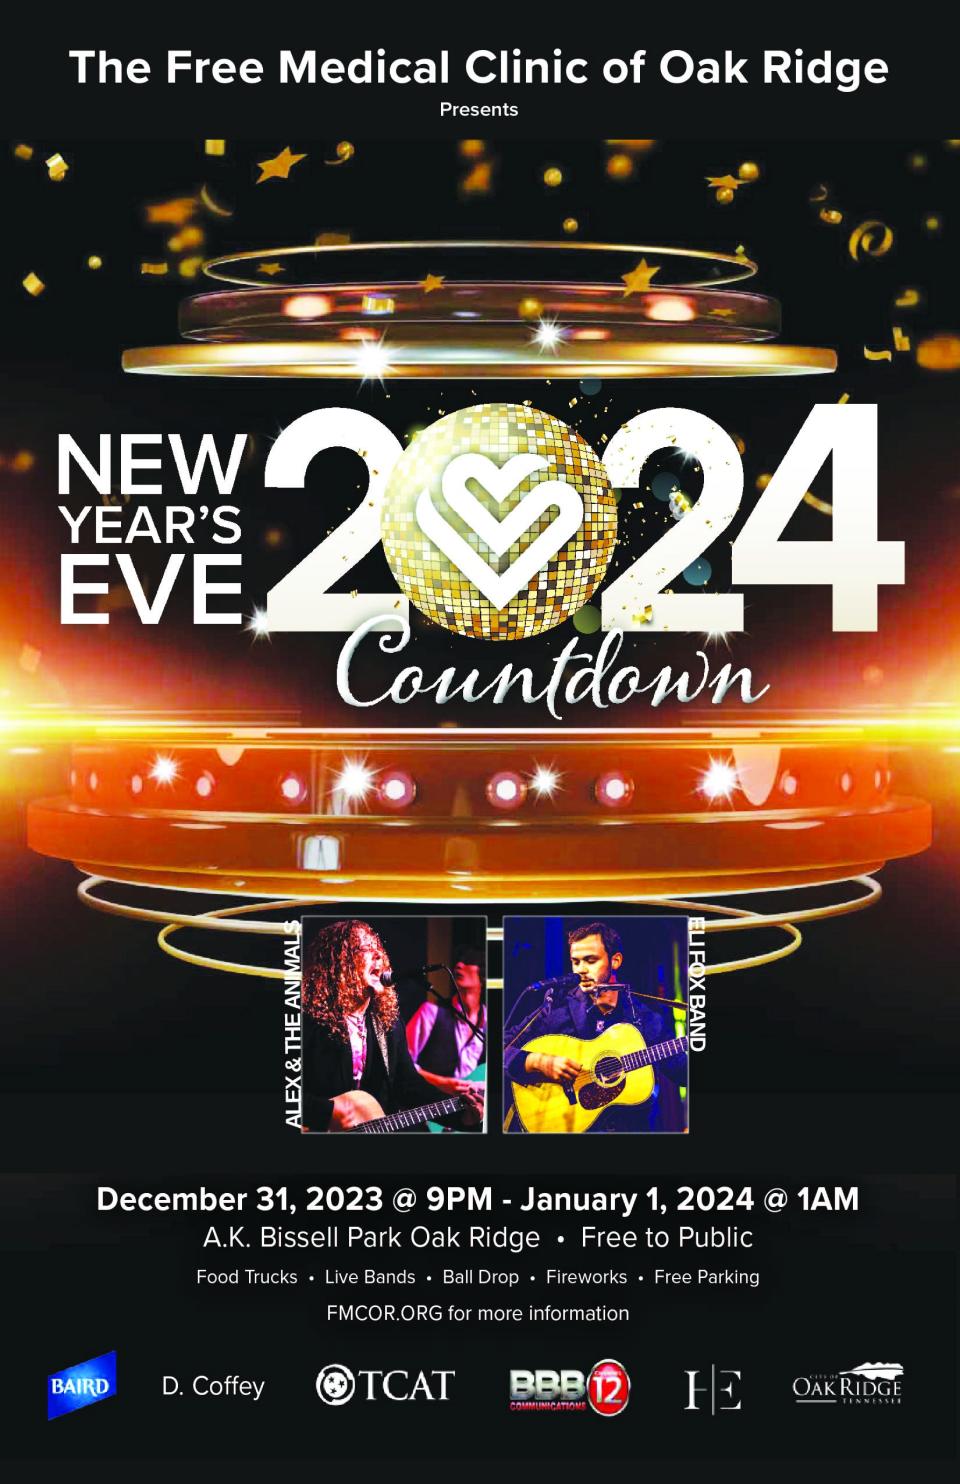 The flier for the New Year's Eve 2024 Countdown event scheduled for Oak Ridge. The event will begin at 9 p.m. Dec. 31 and end at 1 a.m. Jan. 1 in A.K. Bissell Park. It's hosted by Free Medical Clinic of Oak Ridge with lots of sponsors.